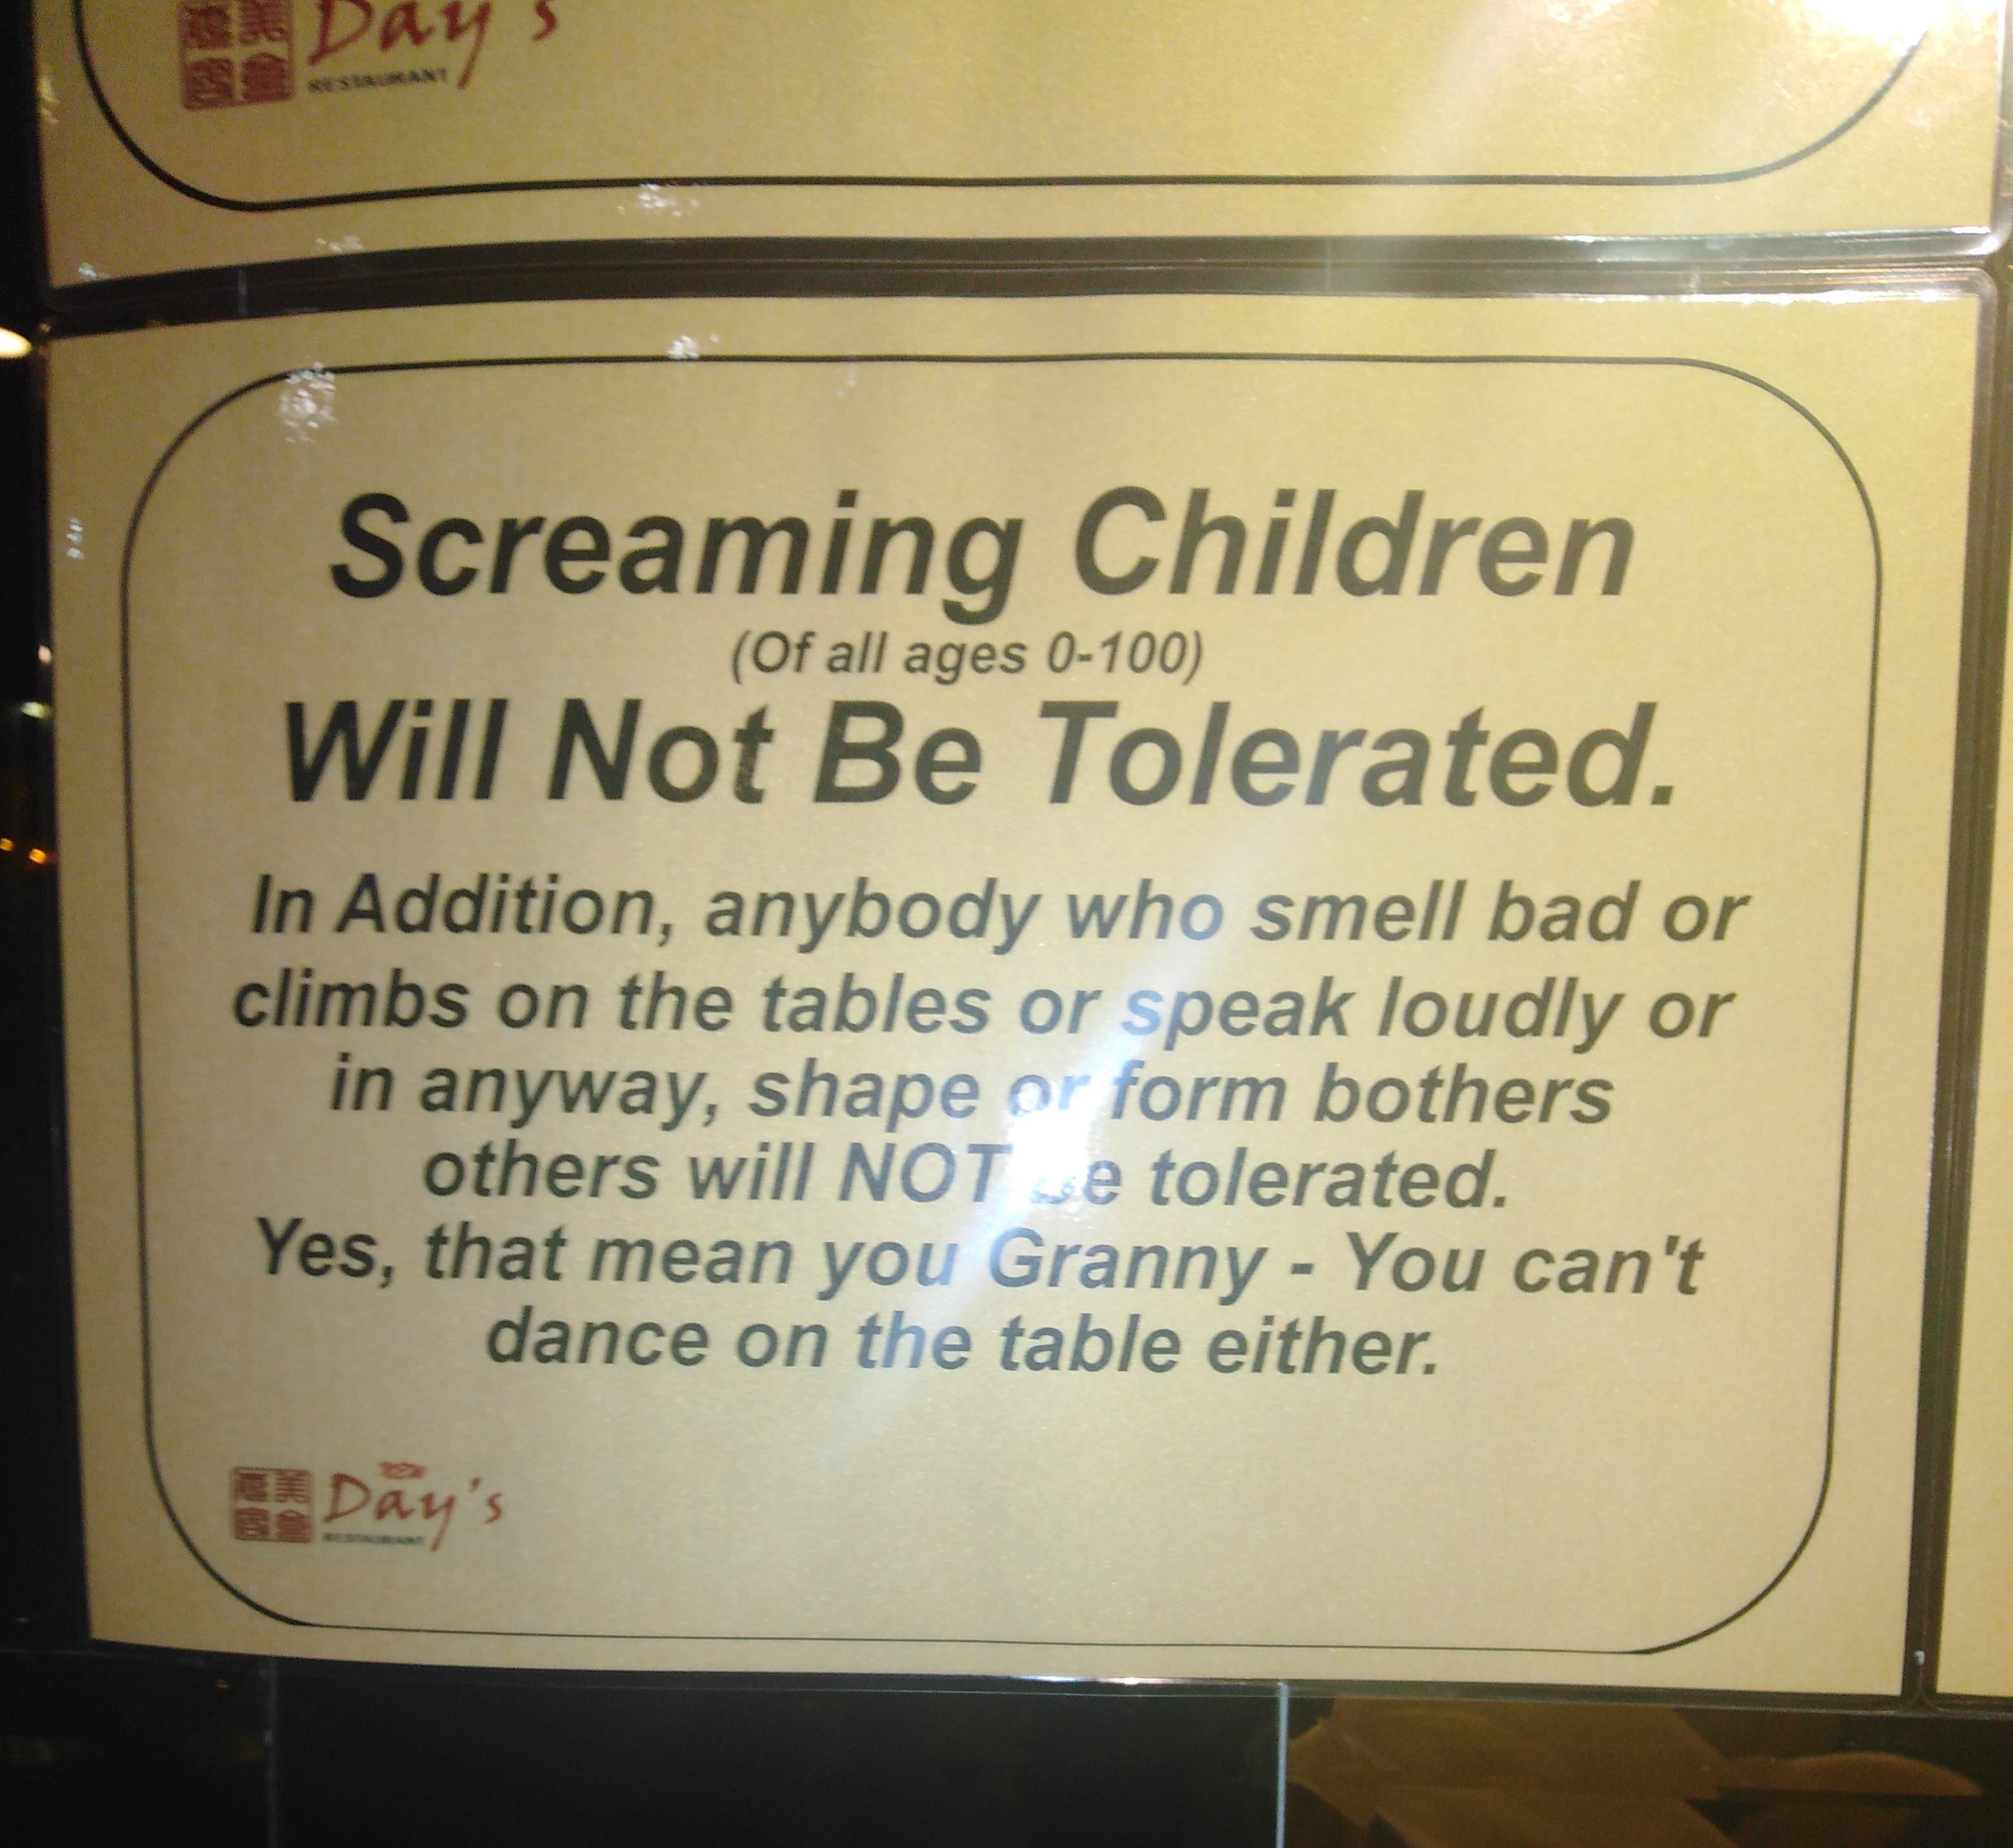 spinclean - Days Screaming Children Of all ages 0100 Will Not Be Tolerated. In Addition, anybody who smell bad or climbs on the tables or speak loudly or in anyway, shape or form bothers others will Not e tolerated. Yes, that mean you Granny You can't dan